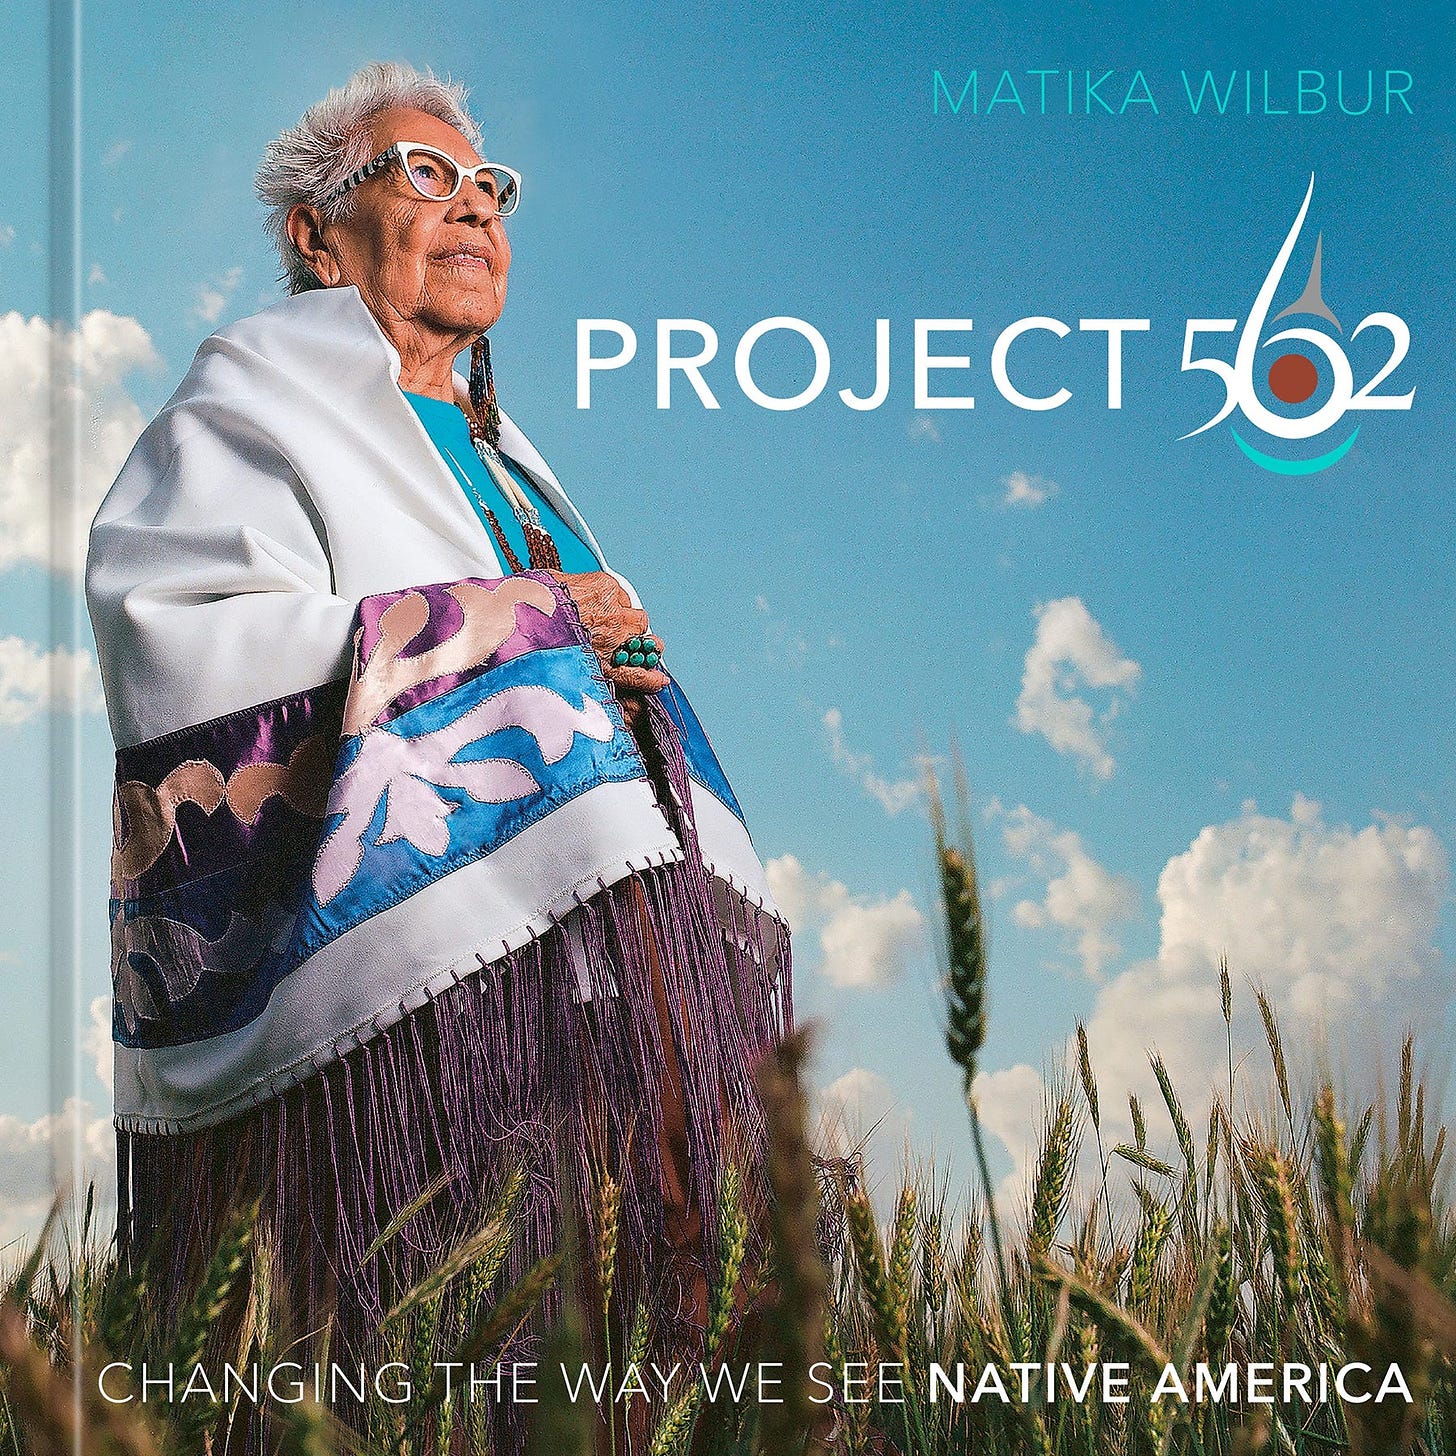 Project 562 book cover shows elder woman in field of wheat